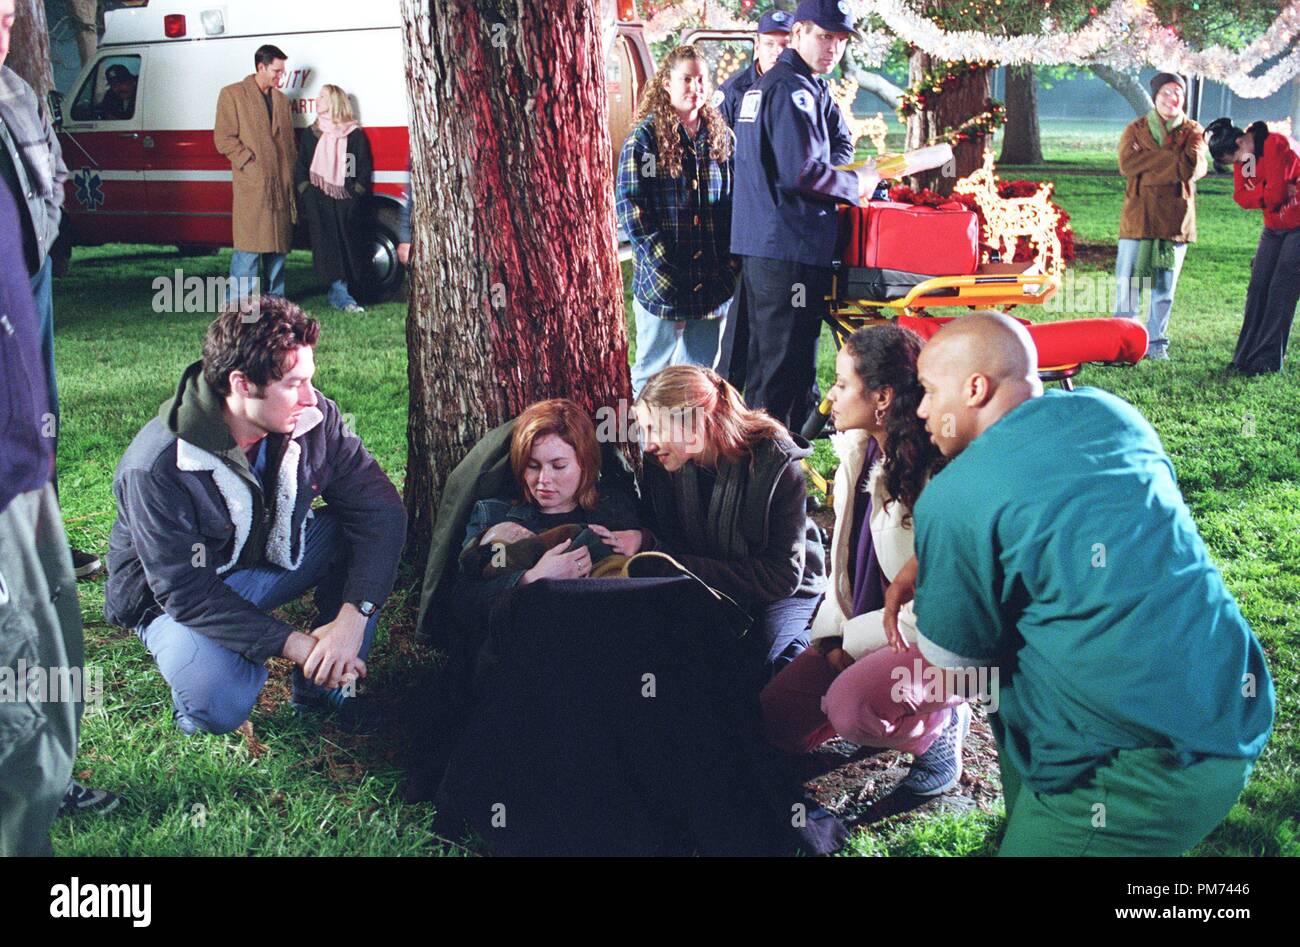 Film Still / Publicity Still from 'Scrubs' Zach Braff, Granger Green, Sarah Chalke, Judy Reyes, Donald Faison circa 2001 Photo credit: Scott Humbert    File Reference # 30847383THA  For Editorial Use Only -  All Rights Reserved Stock Photo